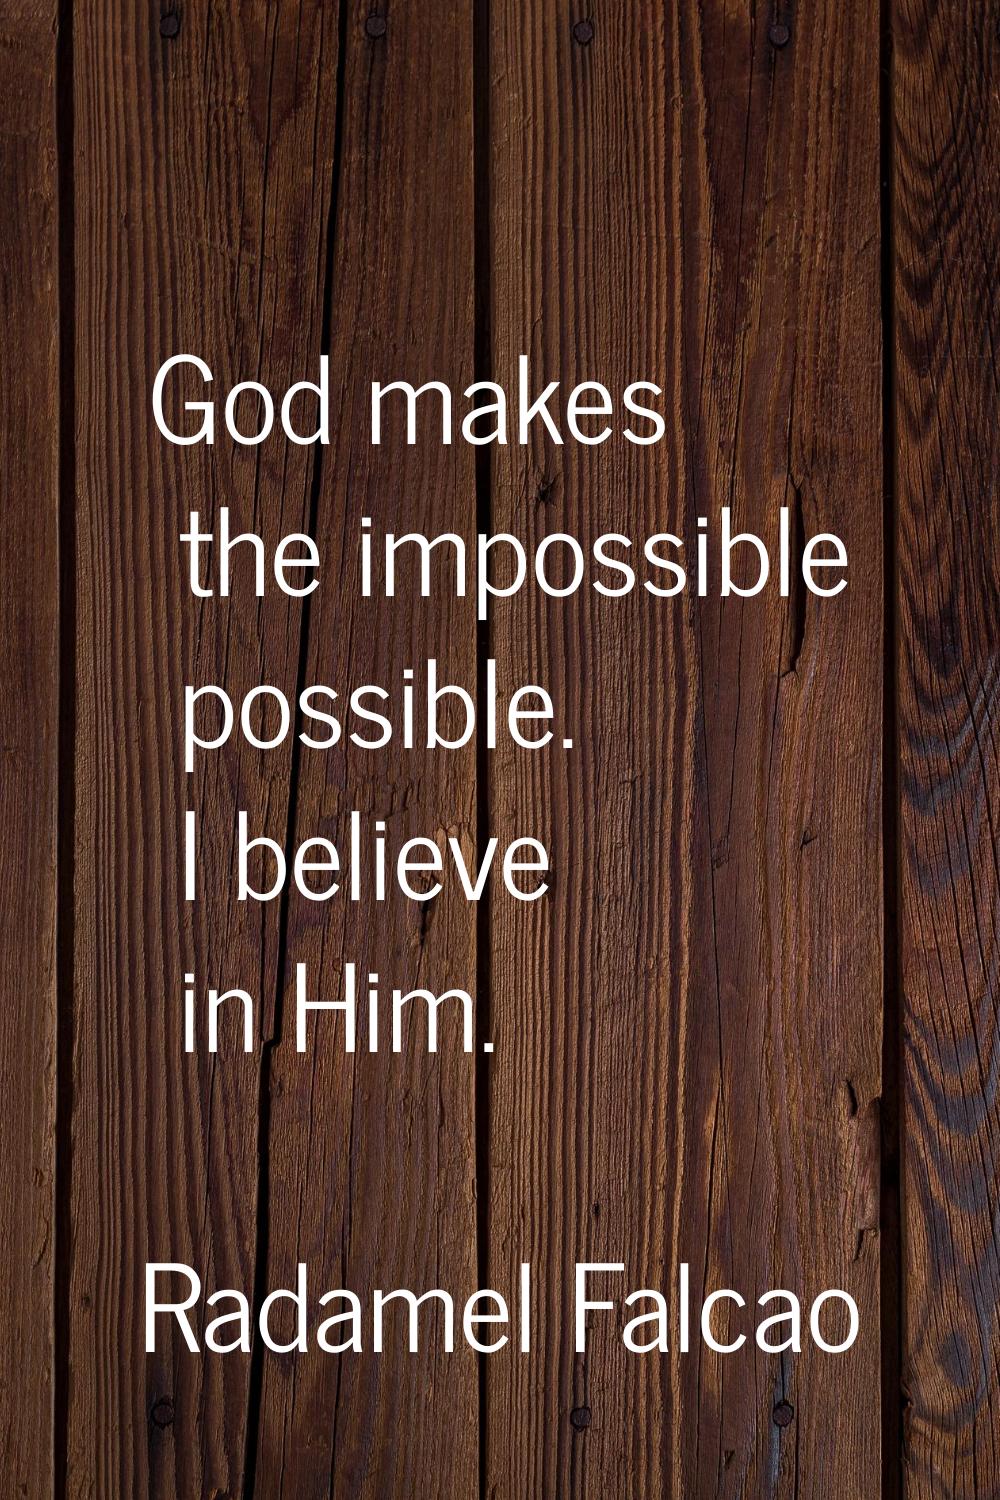 God makes the impossible possible. I believe in Him.